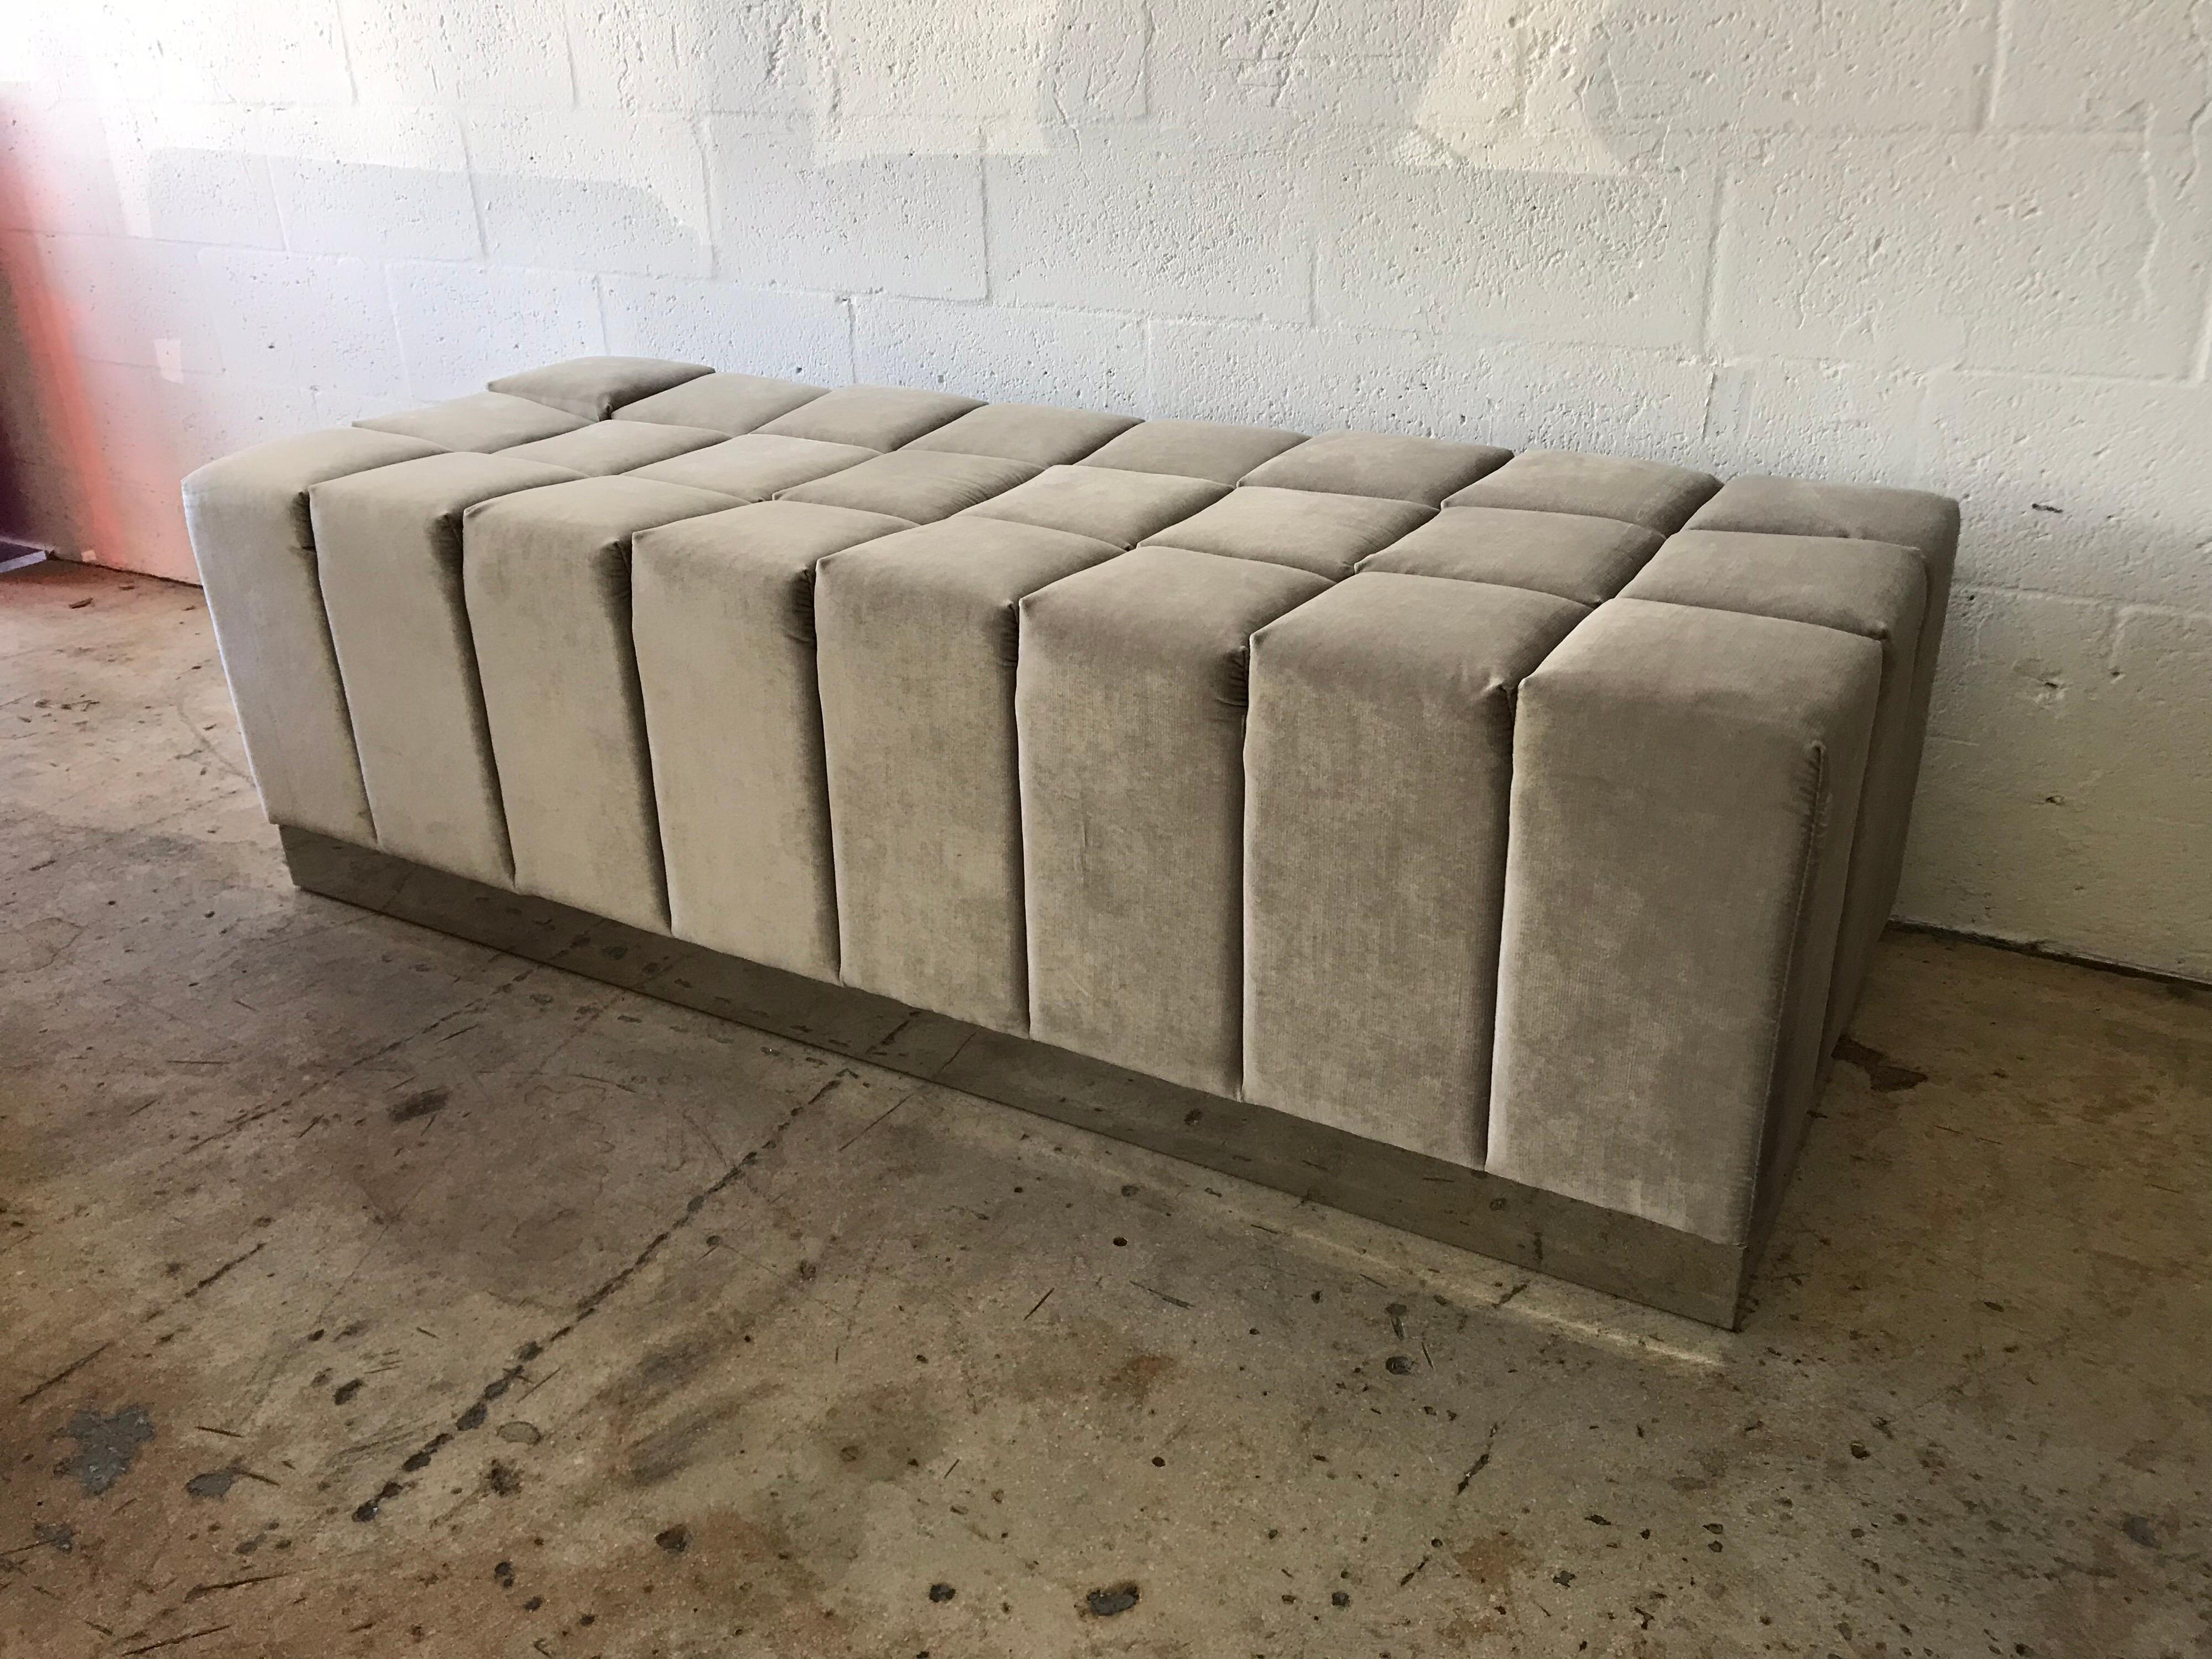 Biscuit tufted bench or ottoman stool rendered in grey, gray velvet and mirror polished stainless steel in the style of Harvey Probber